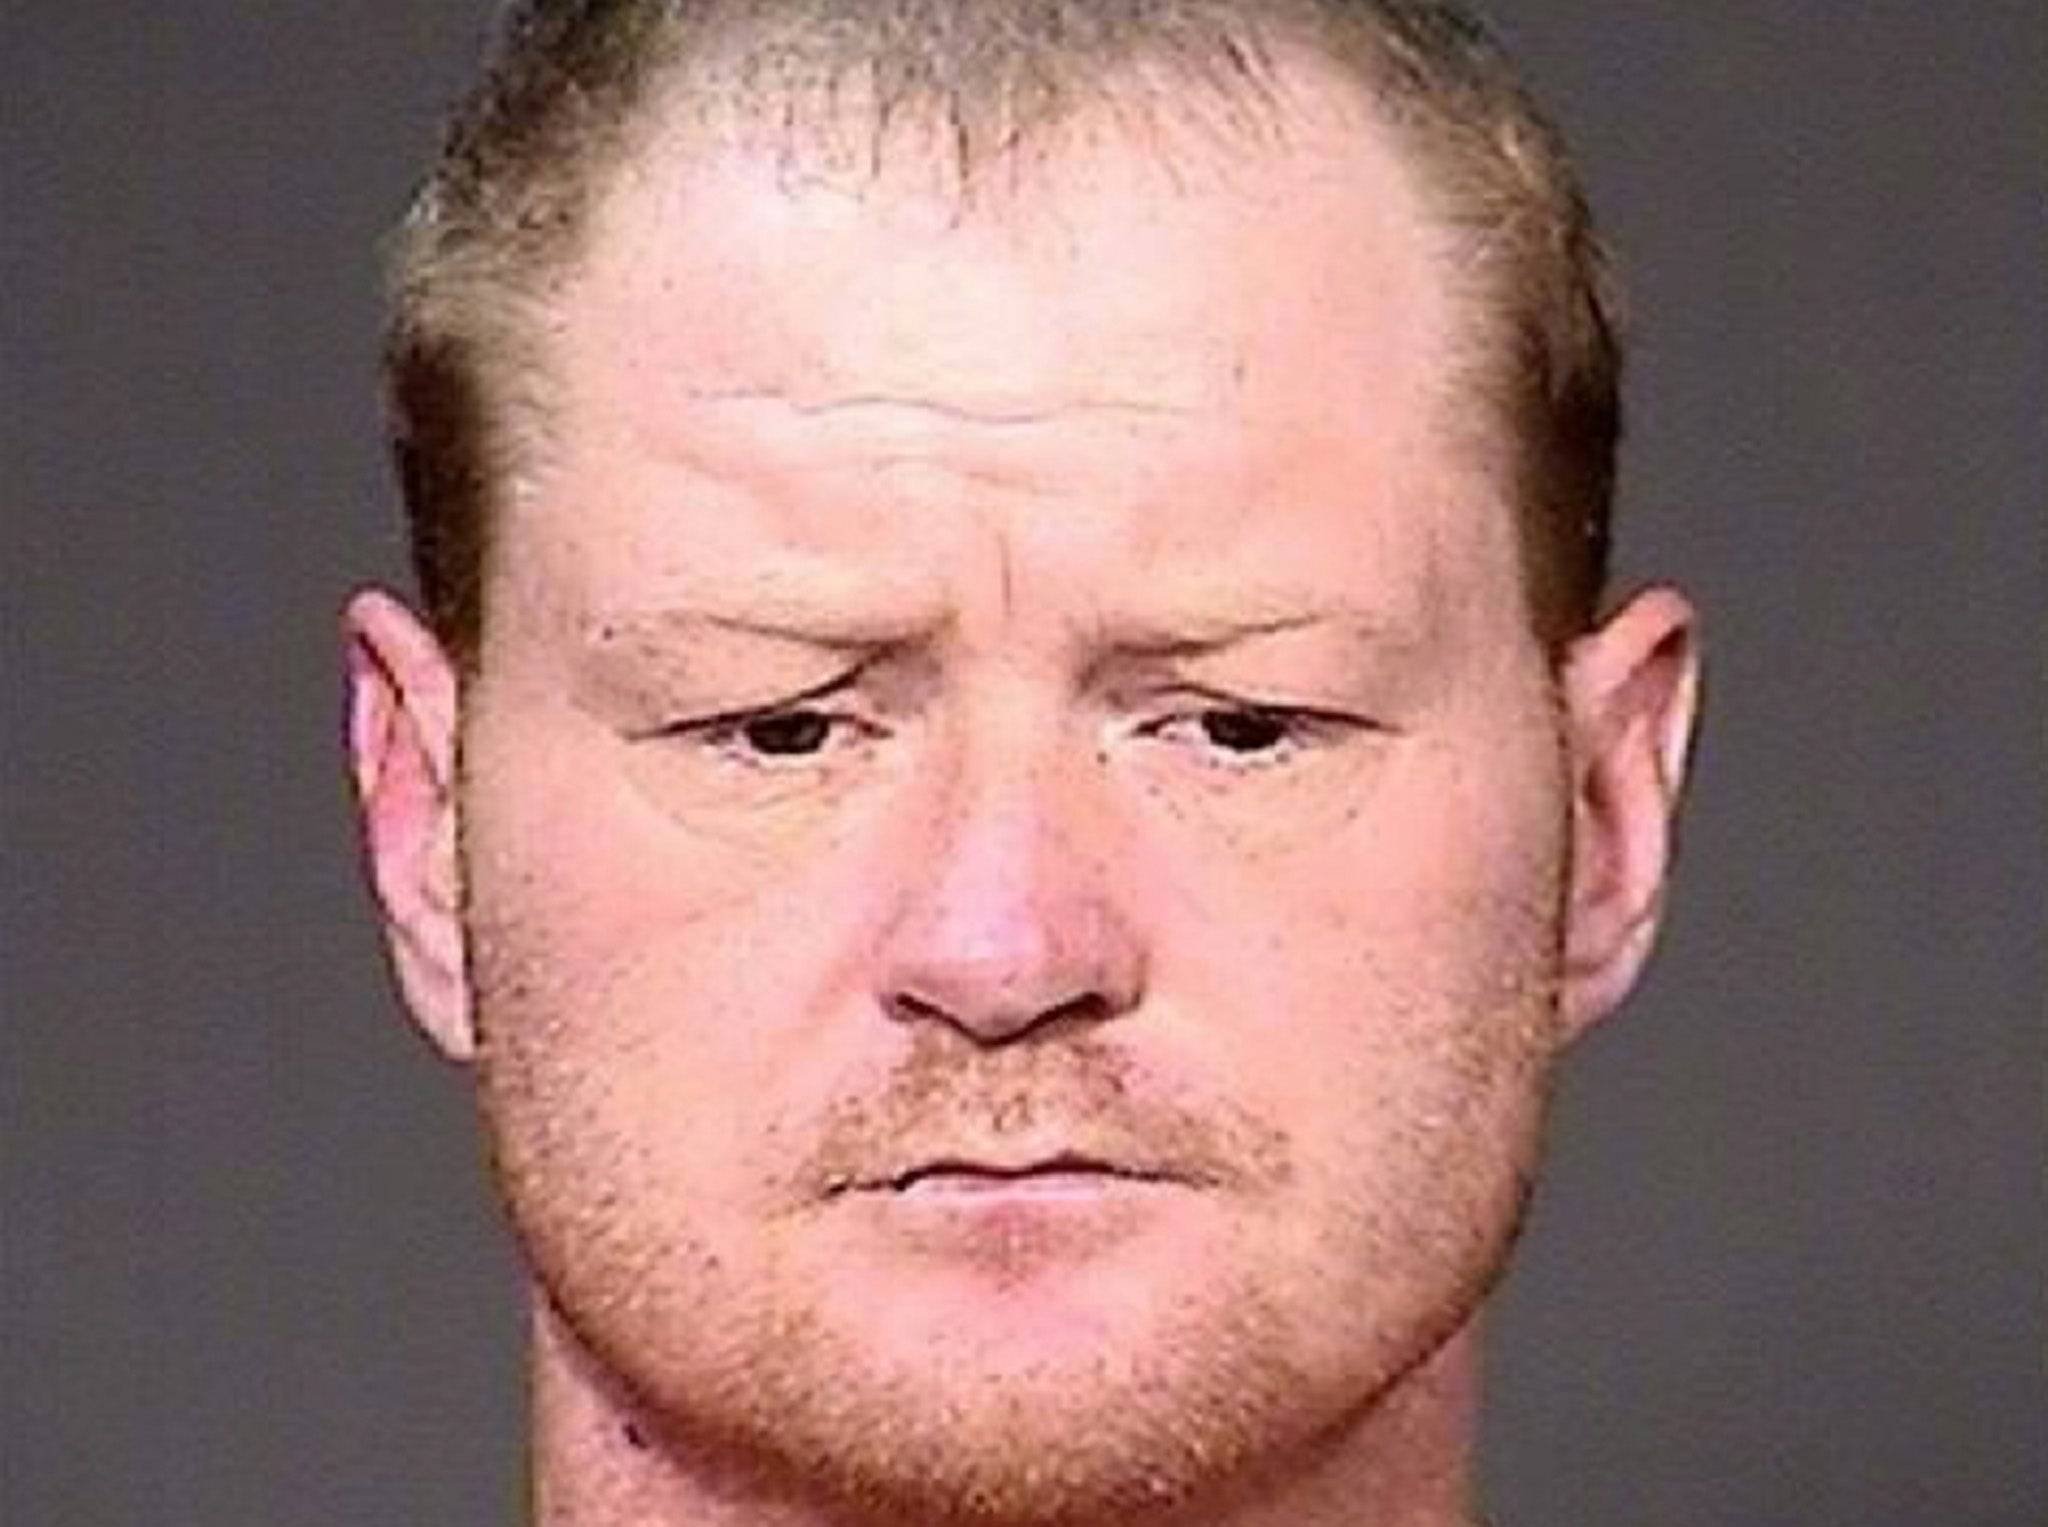 Joseph Thoresen, 35, from Grand Rapids Minnesota has been charged with second degree murder